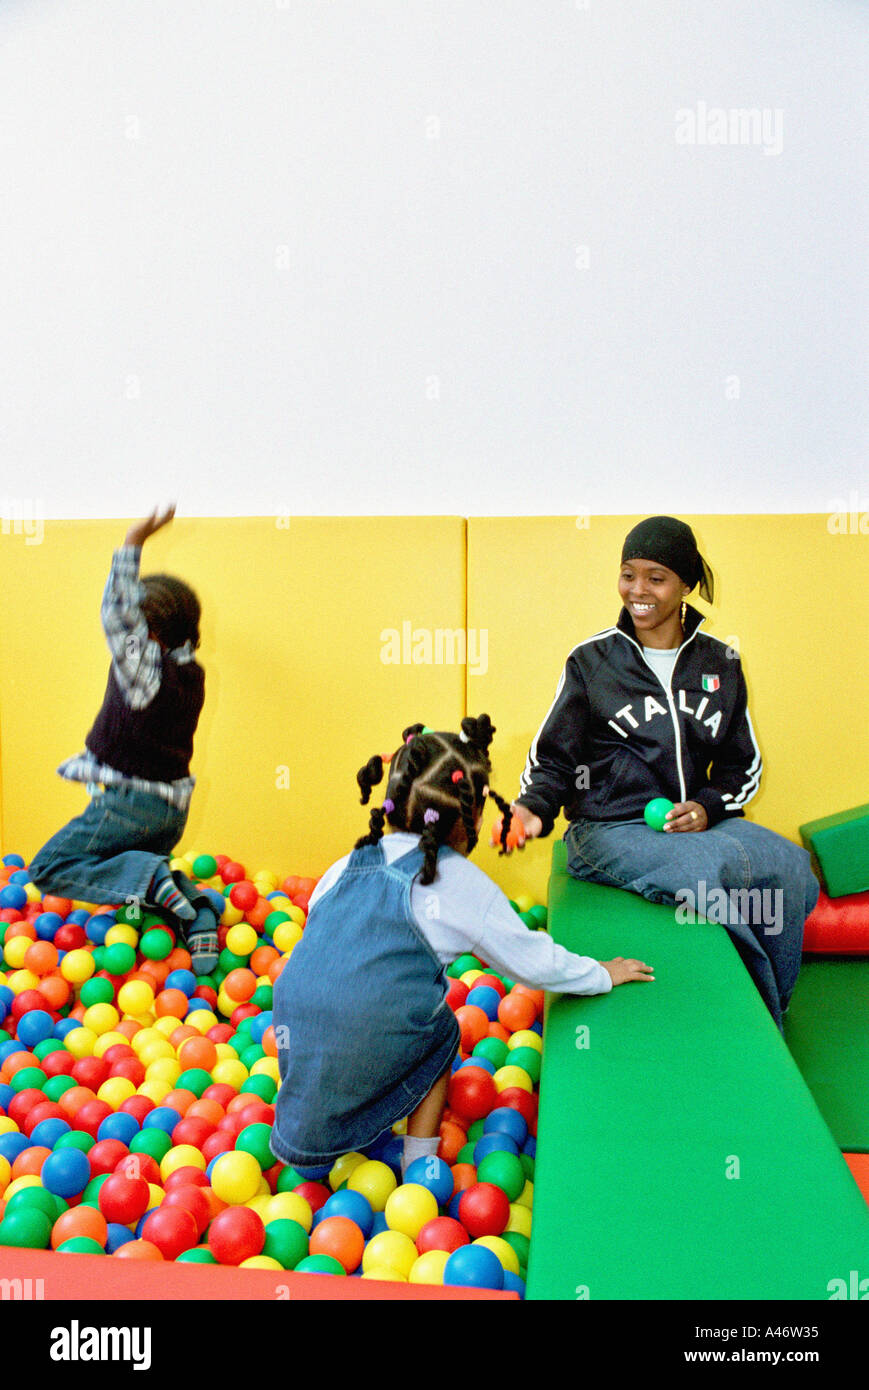 Children playing in ball pool Stock Photo